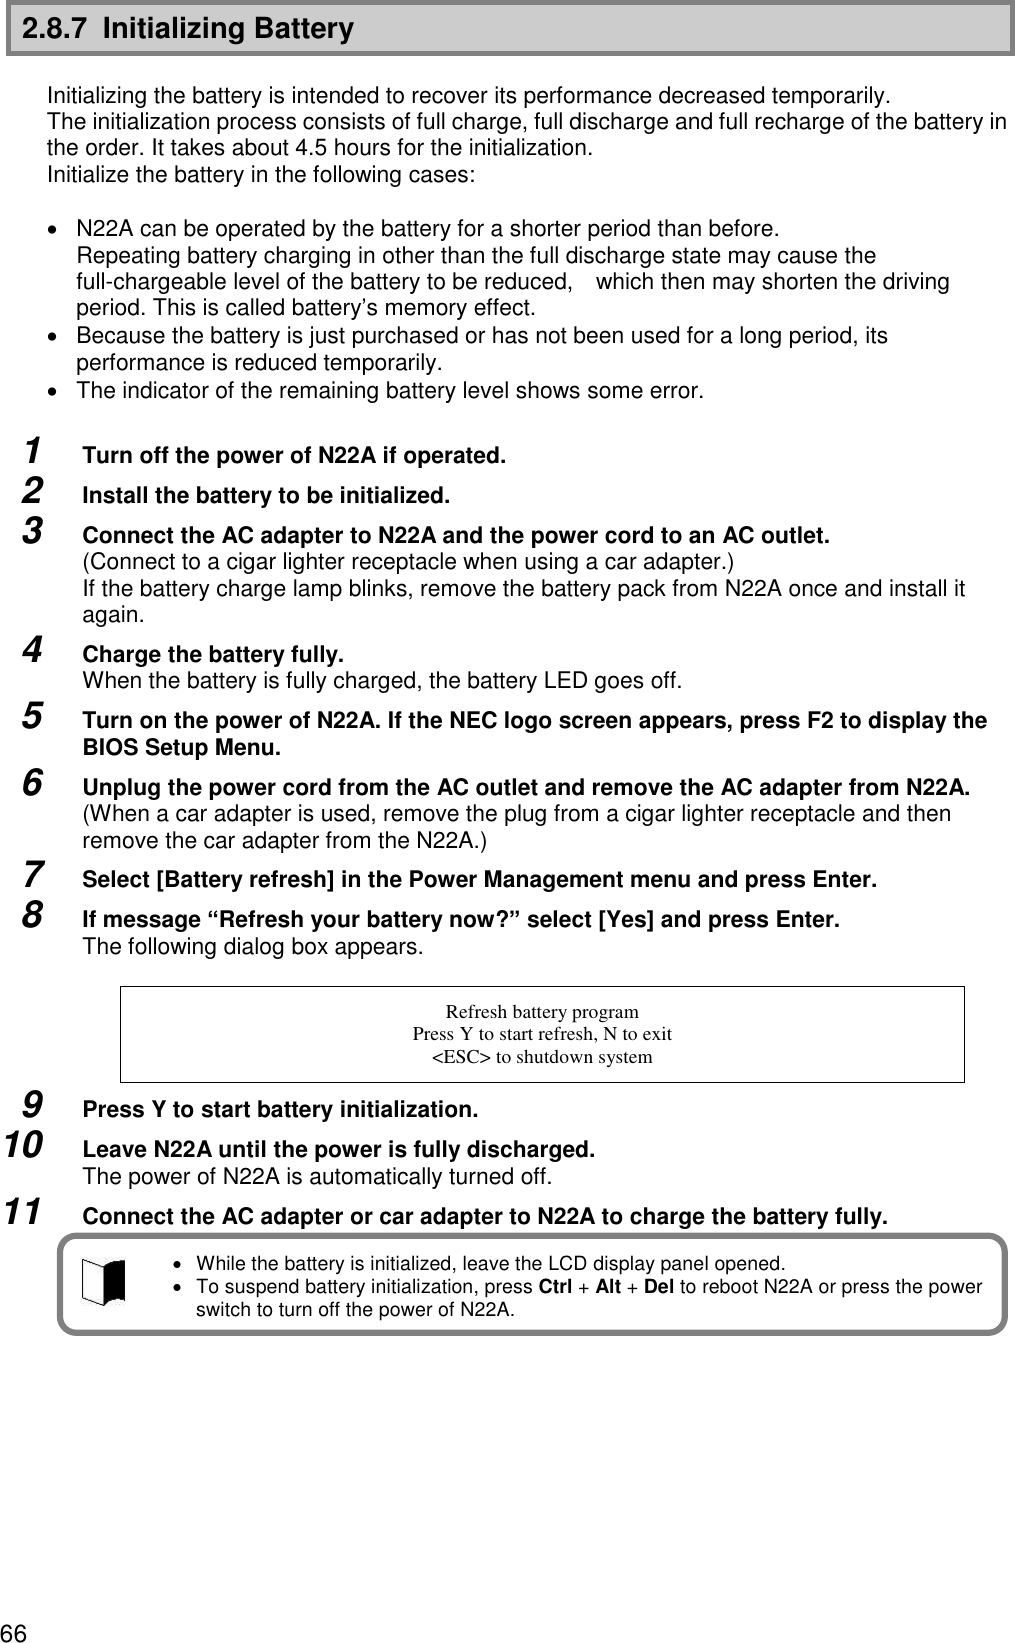 66 2.8.7  Initializing Battery  Initializing the battery is intended to recover its performance decreased temporarily. The initialization process consists of full charge, full discharge and full recharge of the battery in the order. It takes about 4.5 hours for the initialization. Initialize the battery in the following cases:    N22A can be operated by the battery for a shorter period than before. Repeating battery charging in other than the full discharge state may cause the full-chargeable level of the battery to be reduced,    which then may shorten the driving period. This is called battery’s memory effect.   Because the battery is just purchased or has not been used for a long period, its performance is reduced temporarily.   The indicator of the remaining battery level shows some error.  1  Turn off the power of N22A if operated. 2  Install the battery to be initialized. 3  Connect the AC adapter to N22A and the power cord to an AC outlet. (Connect to a cigar lighter receptacle when using a car adapter.) If the battery charge lamp blinks, remove the battery pack from N22A once and install it again. 4  Charge the battery fully. When the battery is fully charged, the battery LED goes off. 5  Turn on the power of N22A. If the NEC logo screen appears, press F2 to display the BIOS Setup Menu. 6  Unplug the power cord from the AC outlet and remove the AC adapter from N22A. (When a car adapter is used, remove the plug from a cigar lighter receptacle and then remove the car adapter from the N22A.) 7  Select [Battery refresh] in the Power Management menu and press Enter. 8  If message “Refresh your battery now?” select [Yes] and press Enter. The following dialog box appears.  Refresh battery program Press Y to start refresh, N to exit &lt;ESC&gt; to shutdown system 9  Press Y to start battery initialization. 10  Leave N22A until the power is fully discharged. The power of N22A is automatically turned off. 11  Connect the AC adapter or car adapter to N22A to charge the battery fully.        While the battery is initialized, leave the LCD display panel opened.   To suspend battery initialization, press Ctrl + Alt + Del to reboot N22A or press the power switch to turn off the power of N22A. 